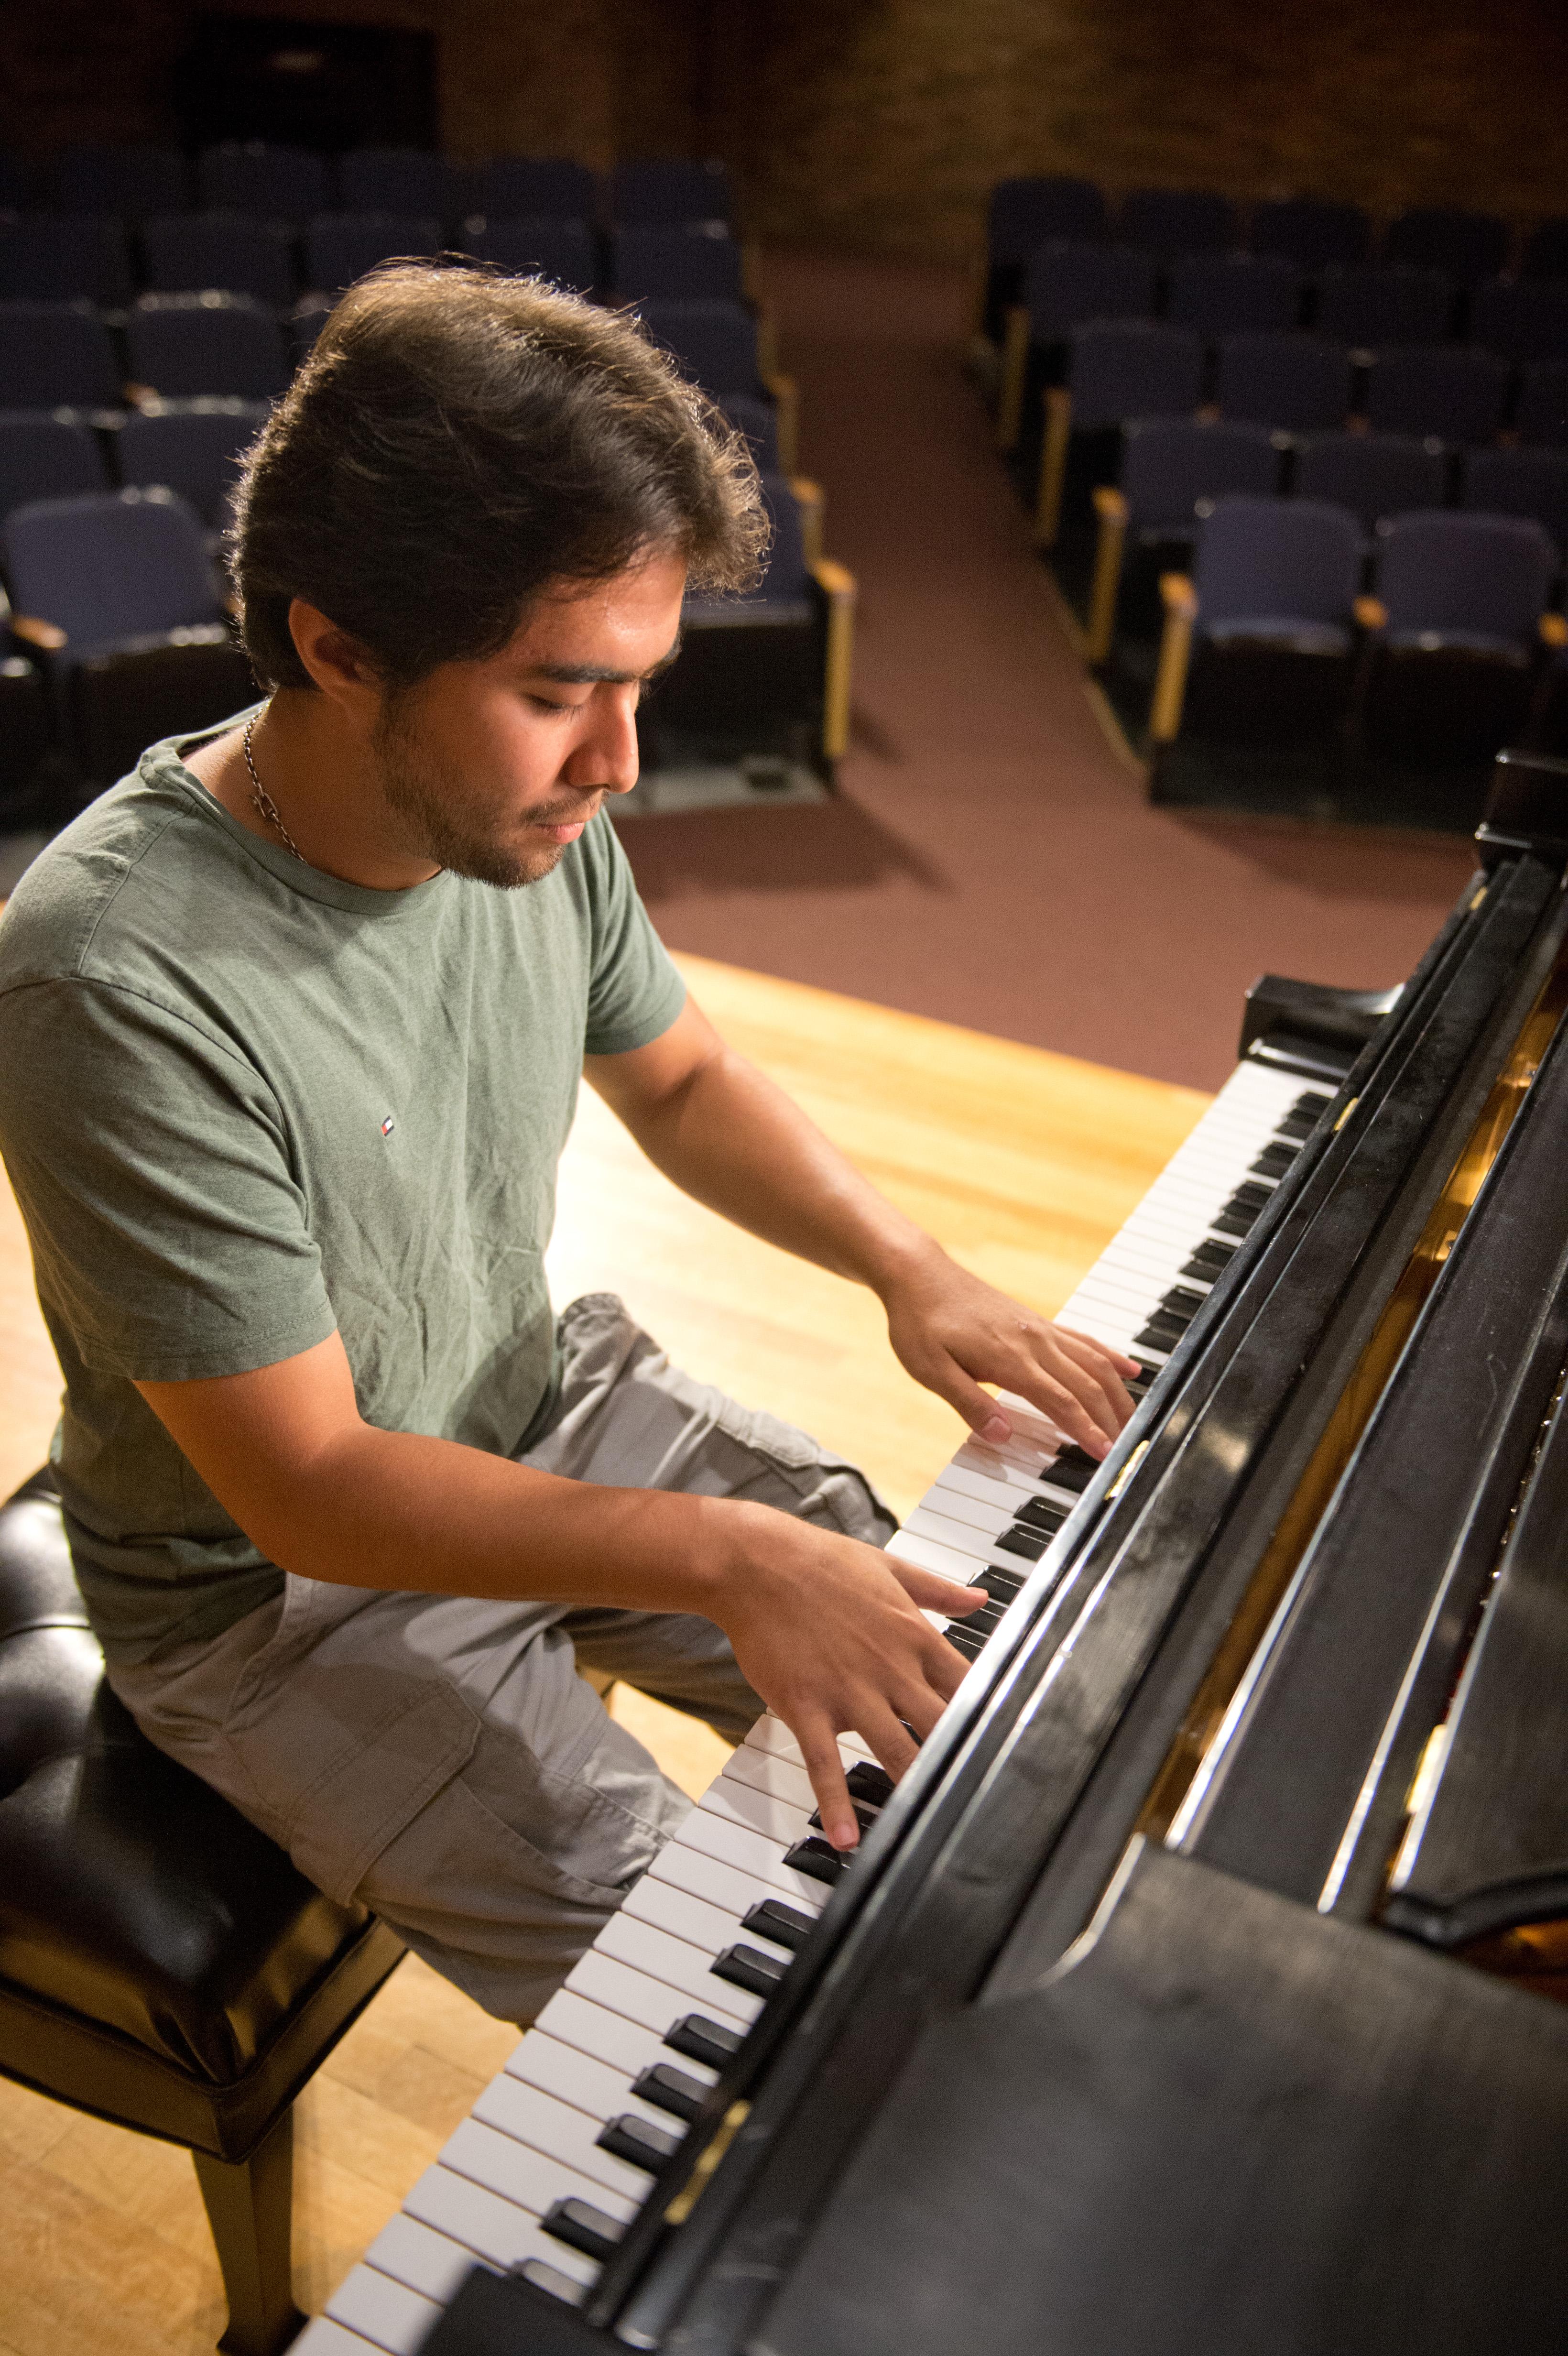 Mount Union student playing the piano on stage.